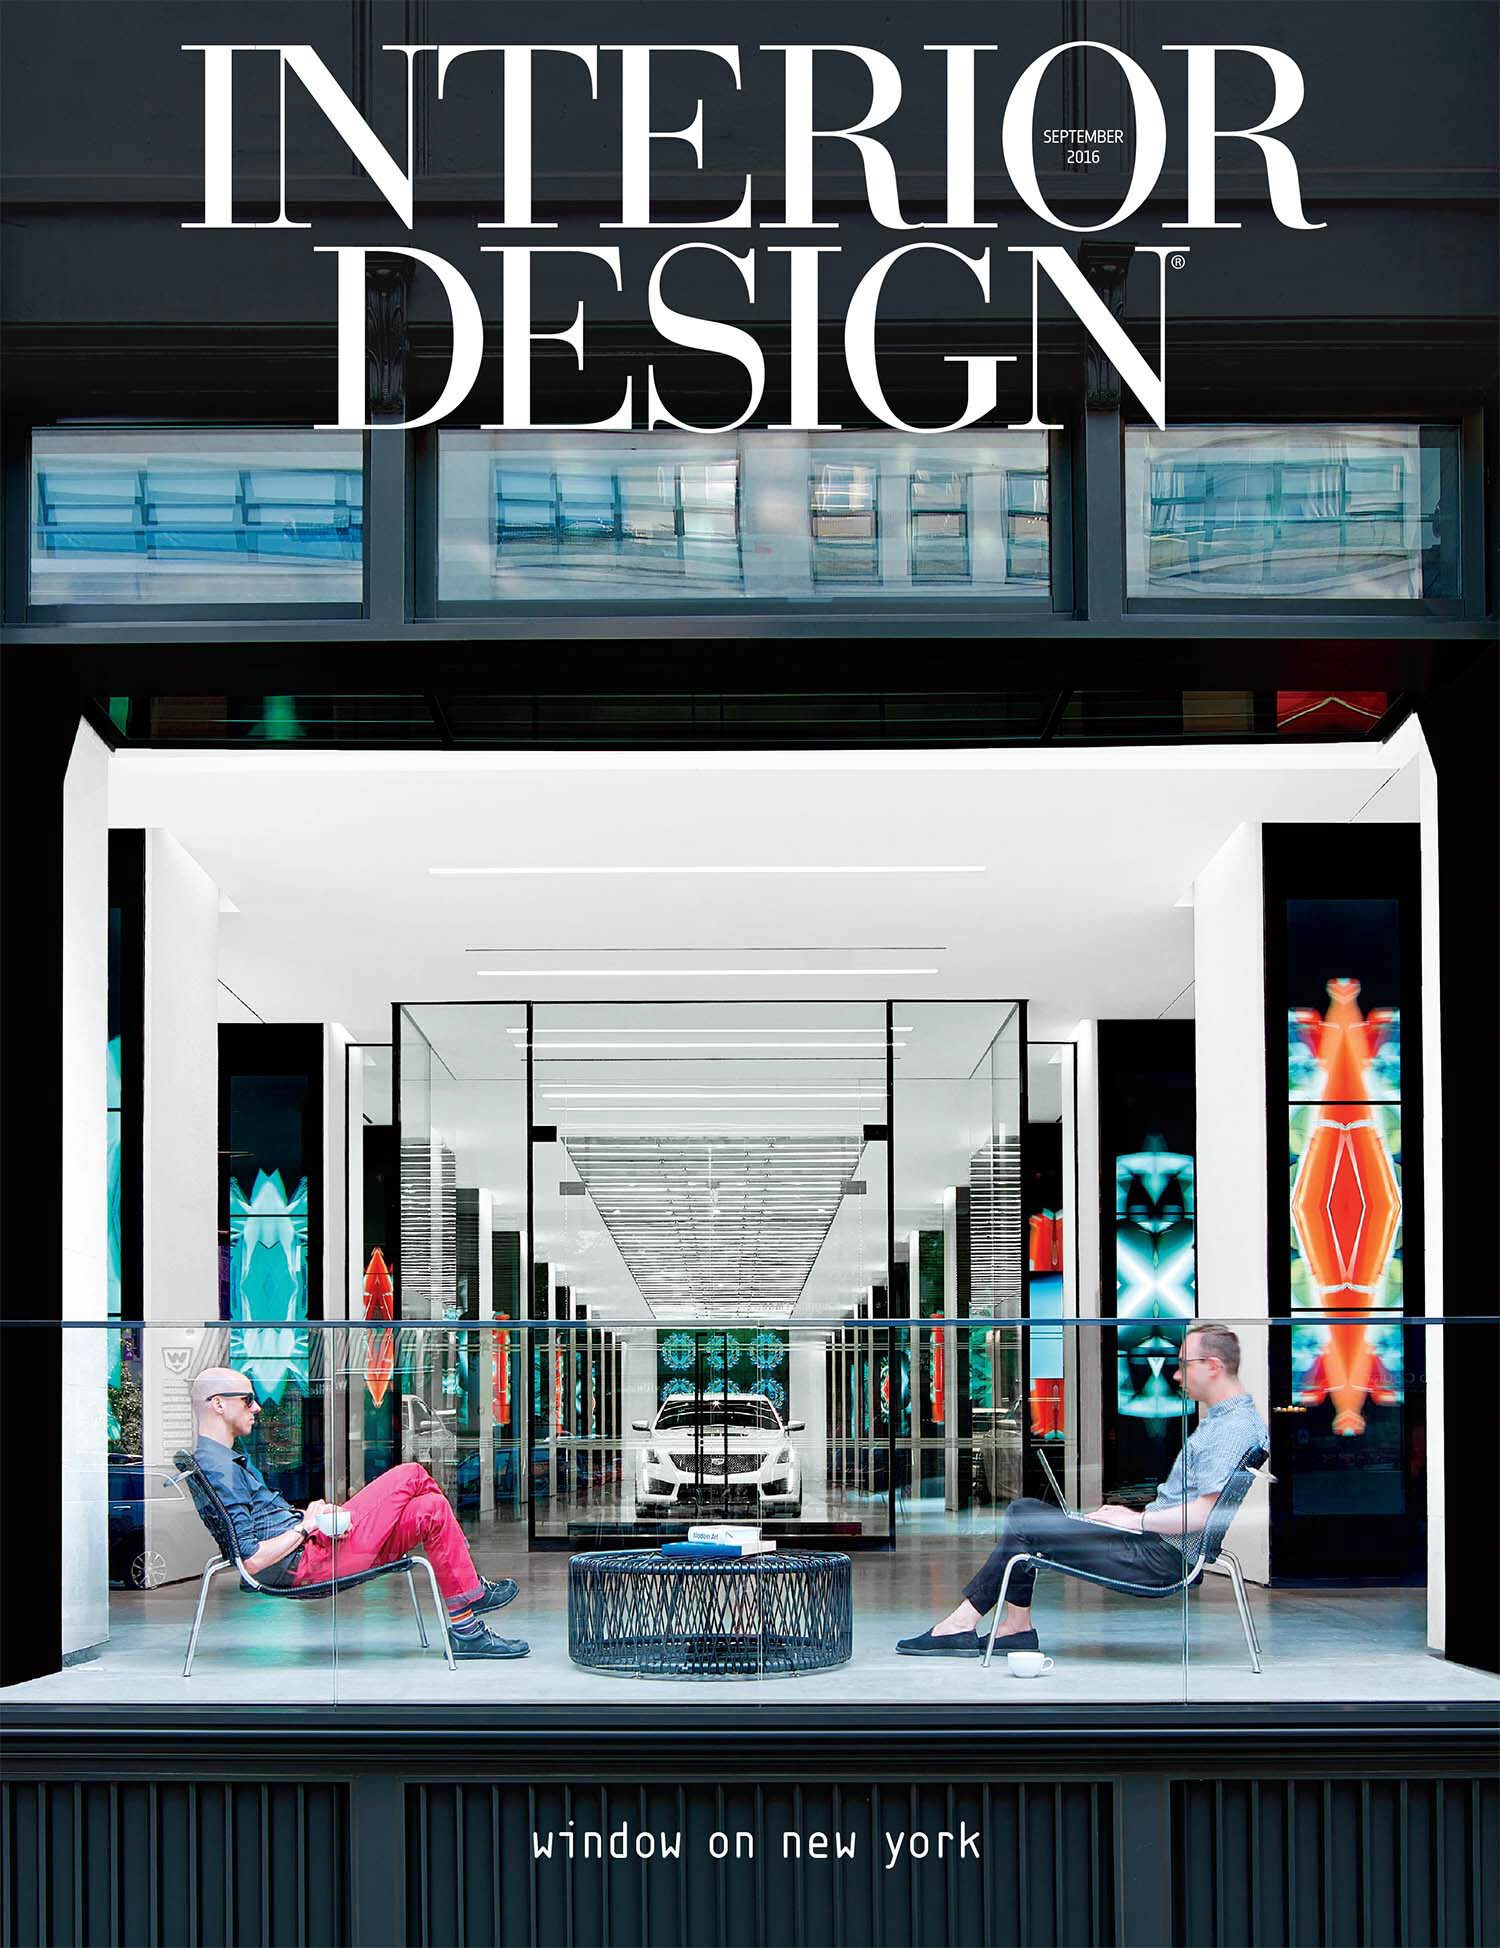 Cadillac House, a branded experience environment in Hudson Square, New York, made September 2016’s cover.